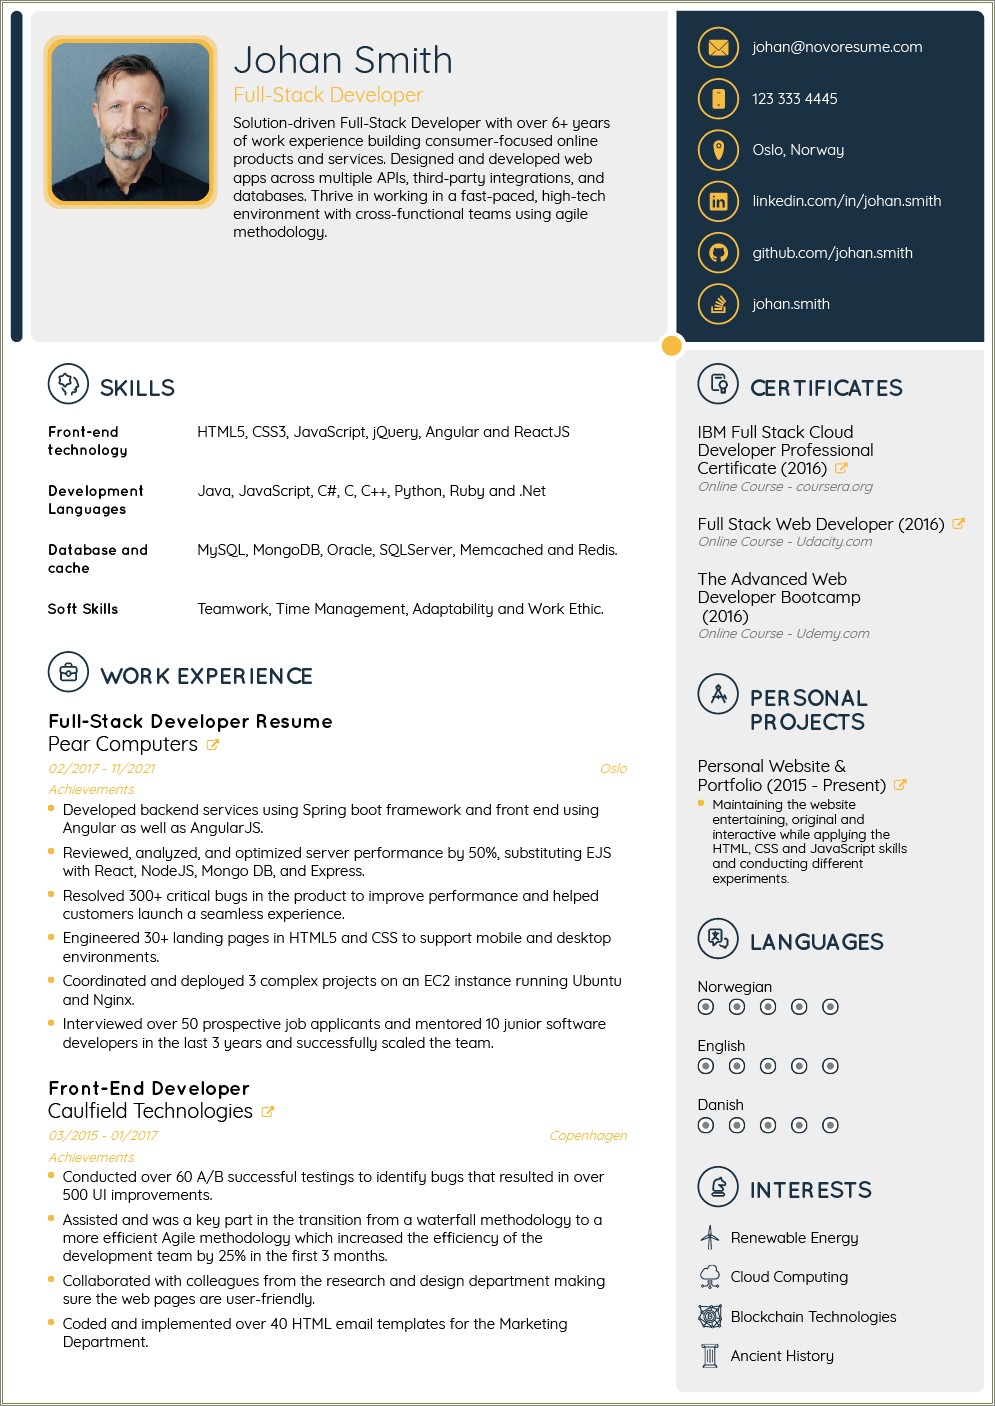 Experience Working In Agile Environment Resume